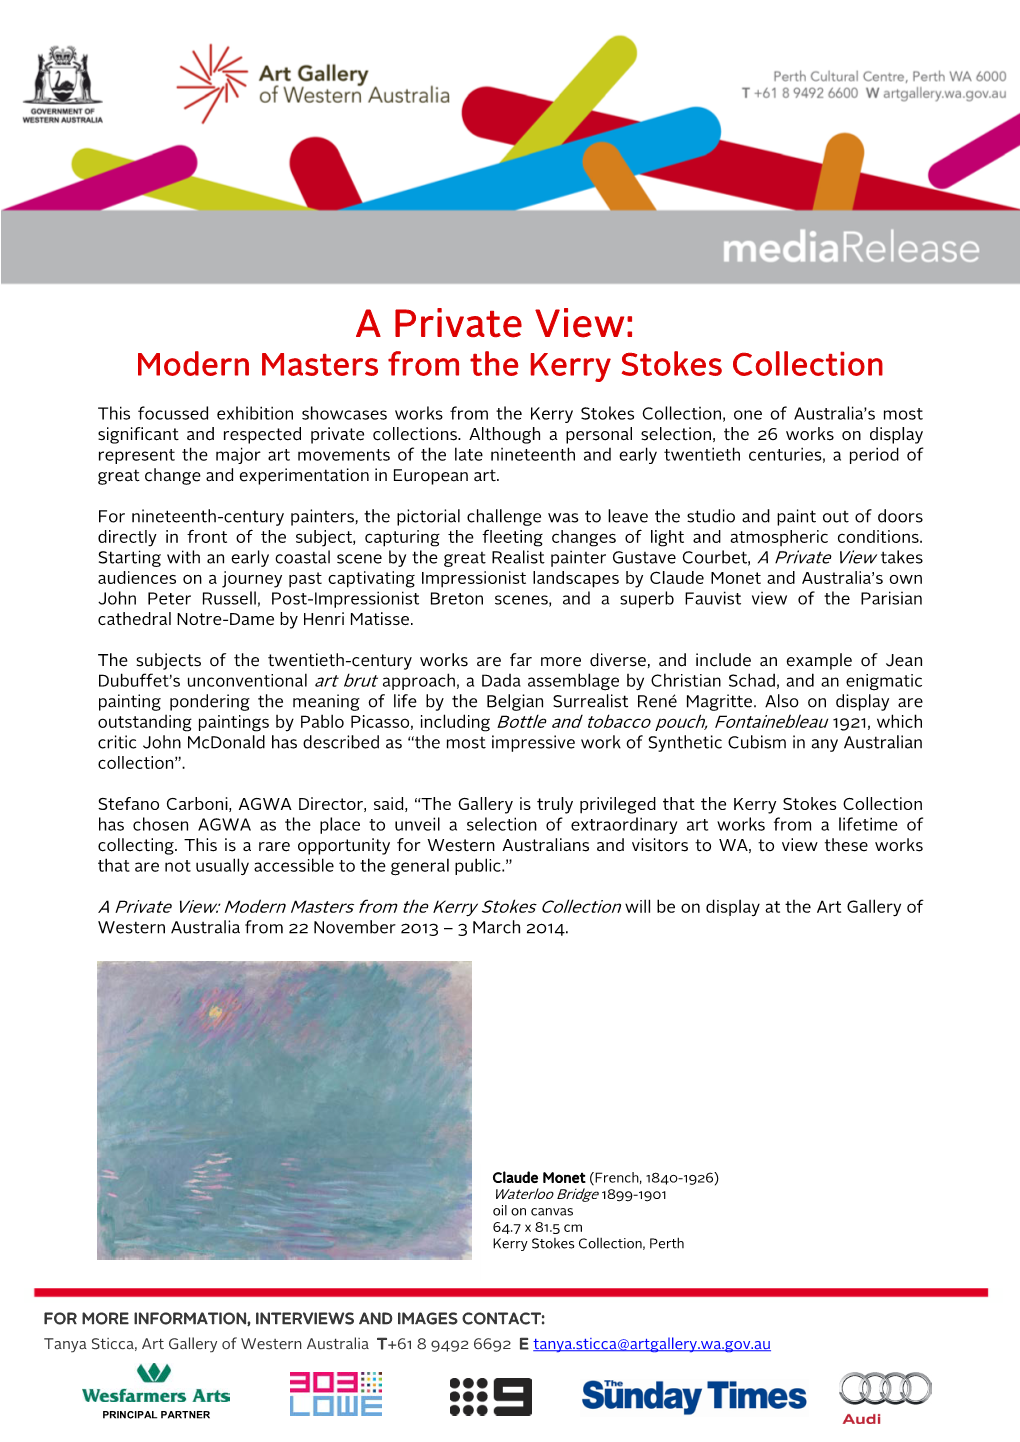 A Private View: Modern Masters from the Kerry Stokes Collection